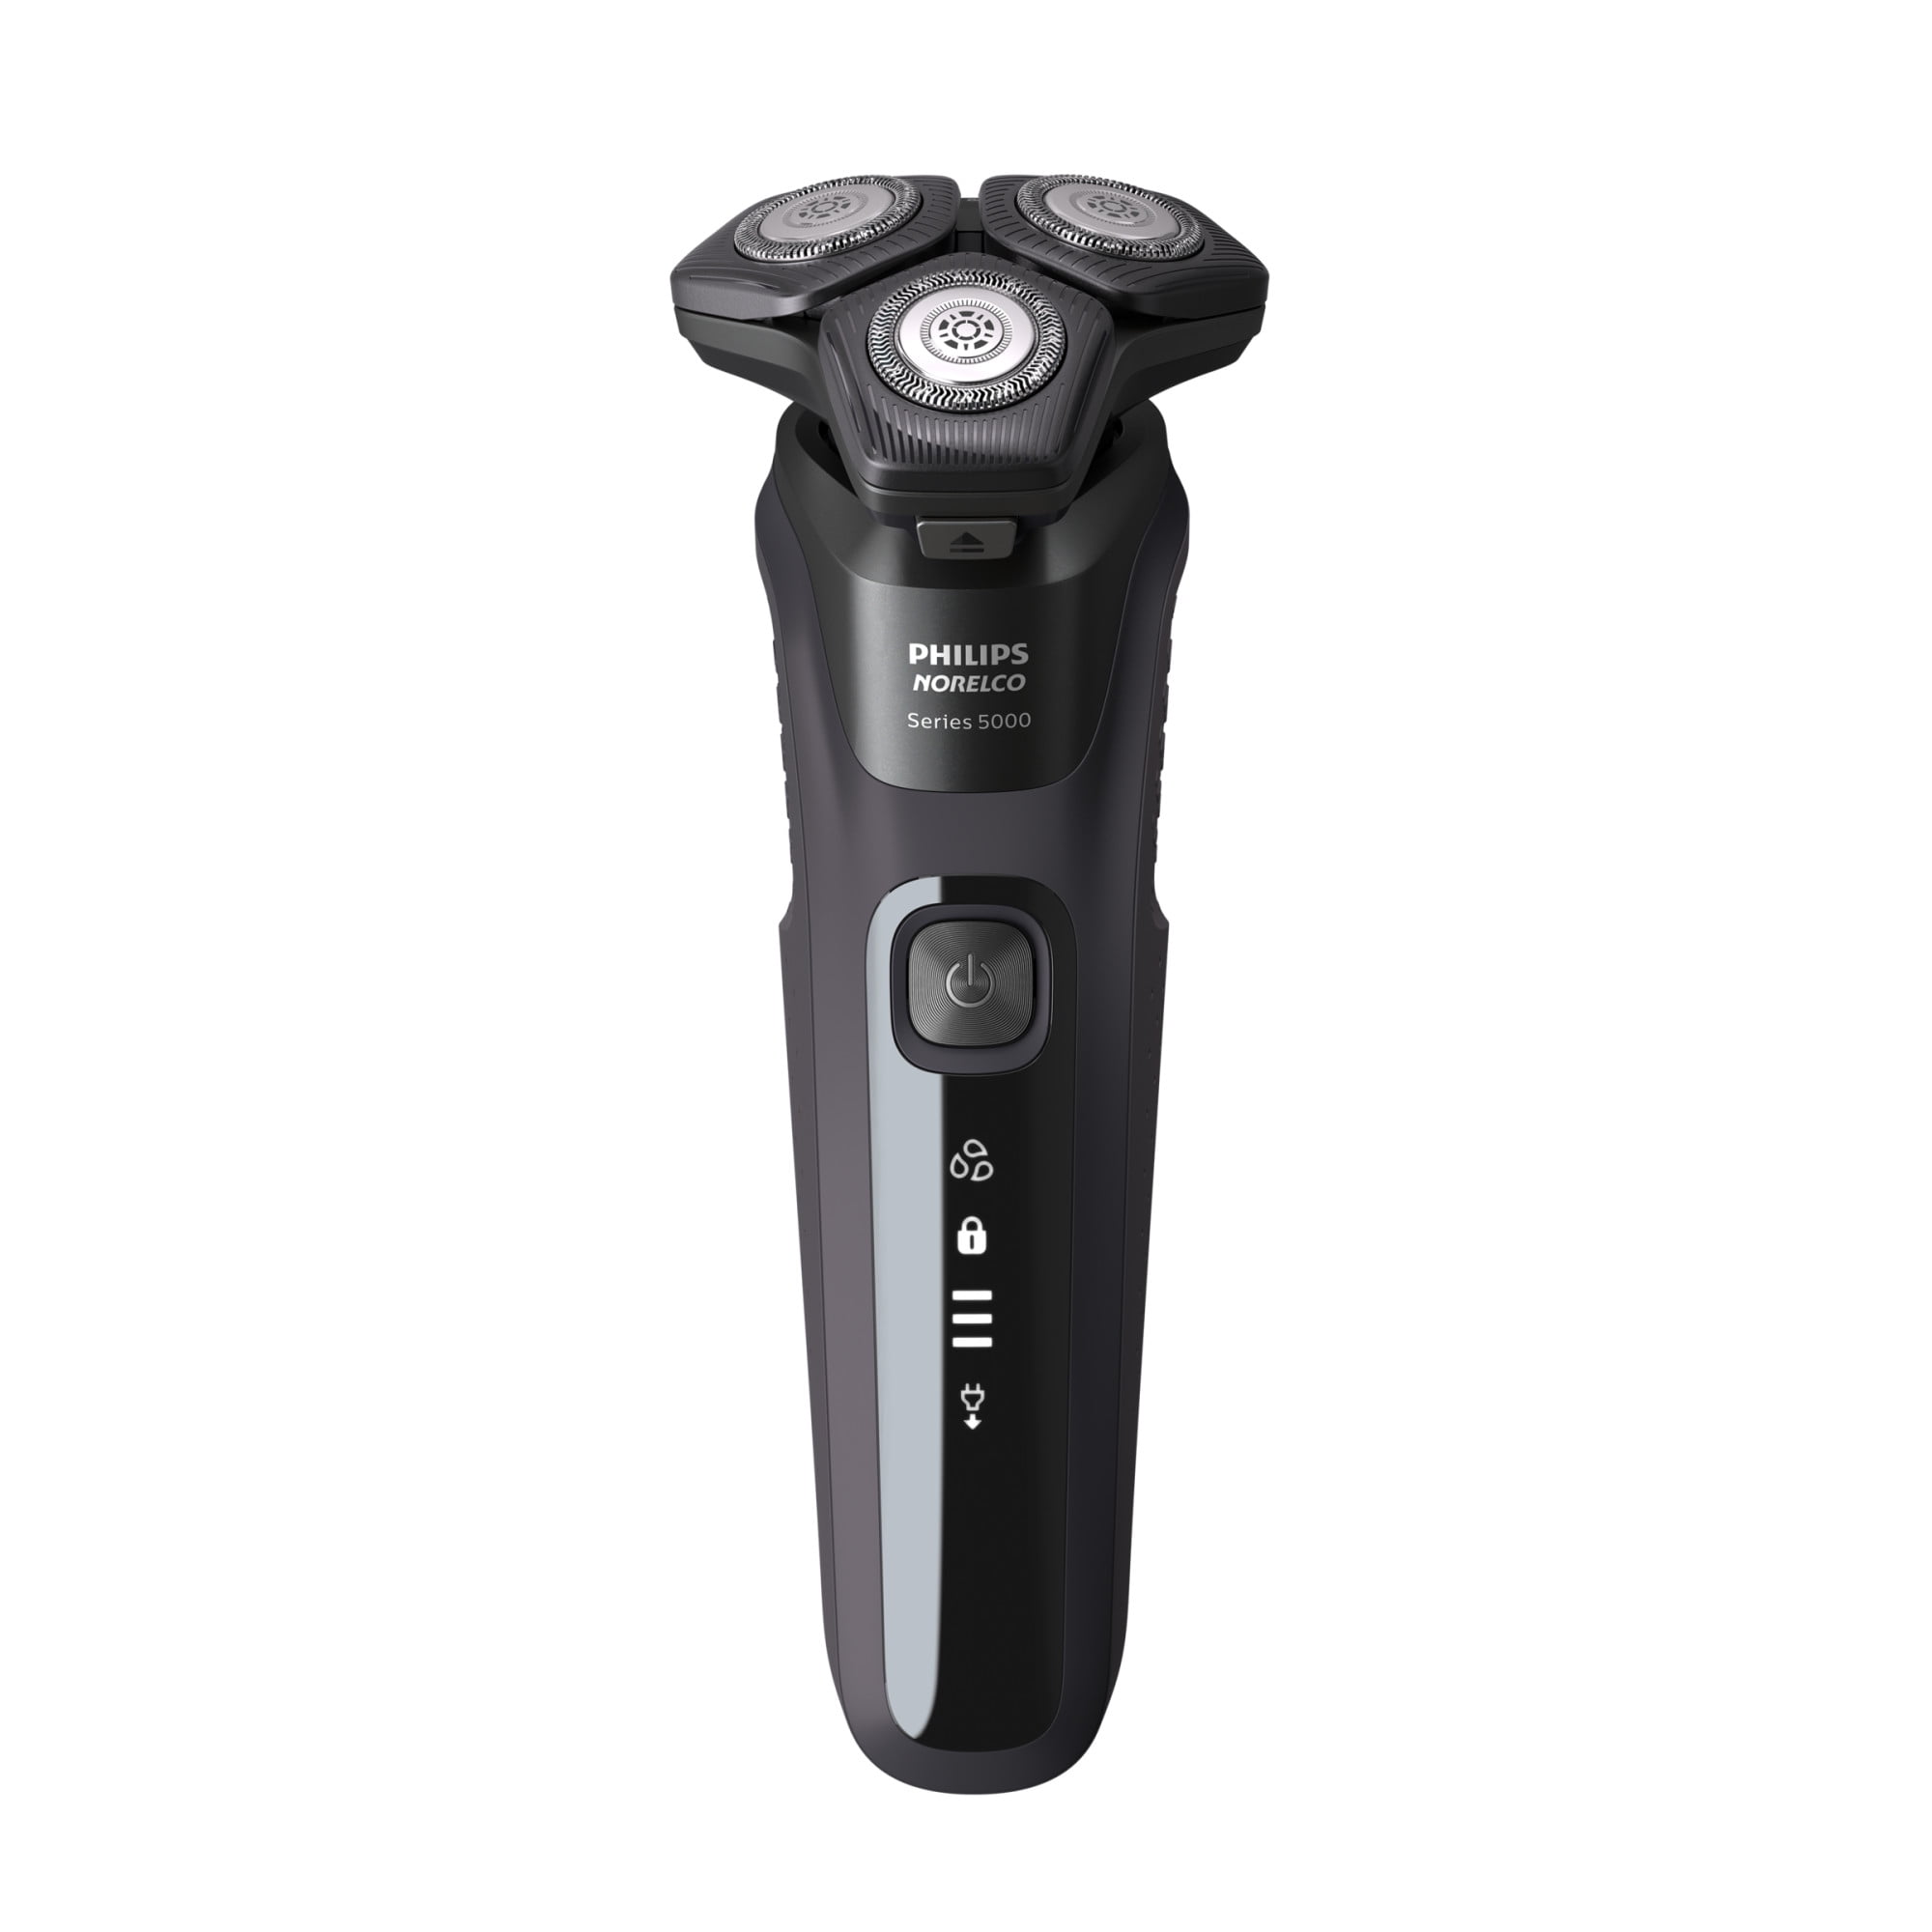 Philips Norelco Shaver 3500, Rechargeable Wet & Dry Electric 